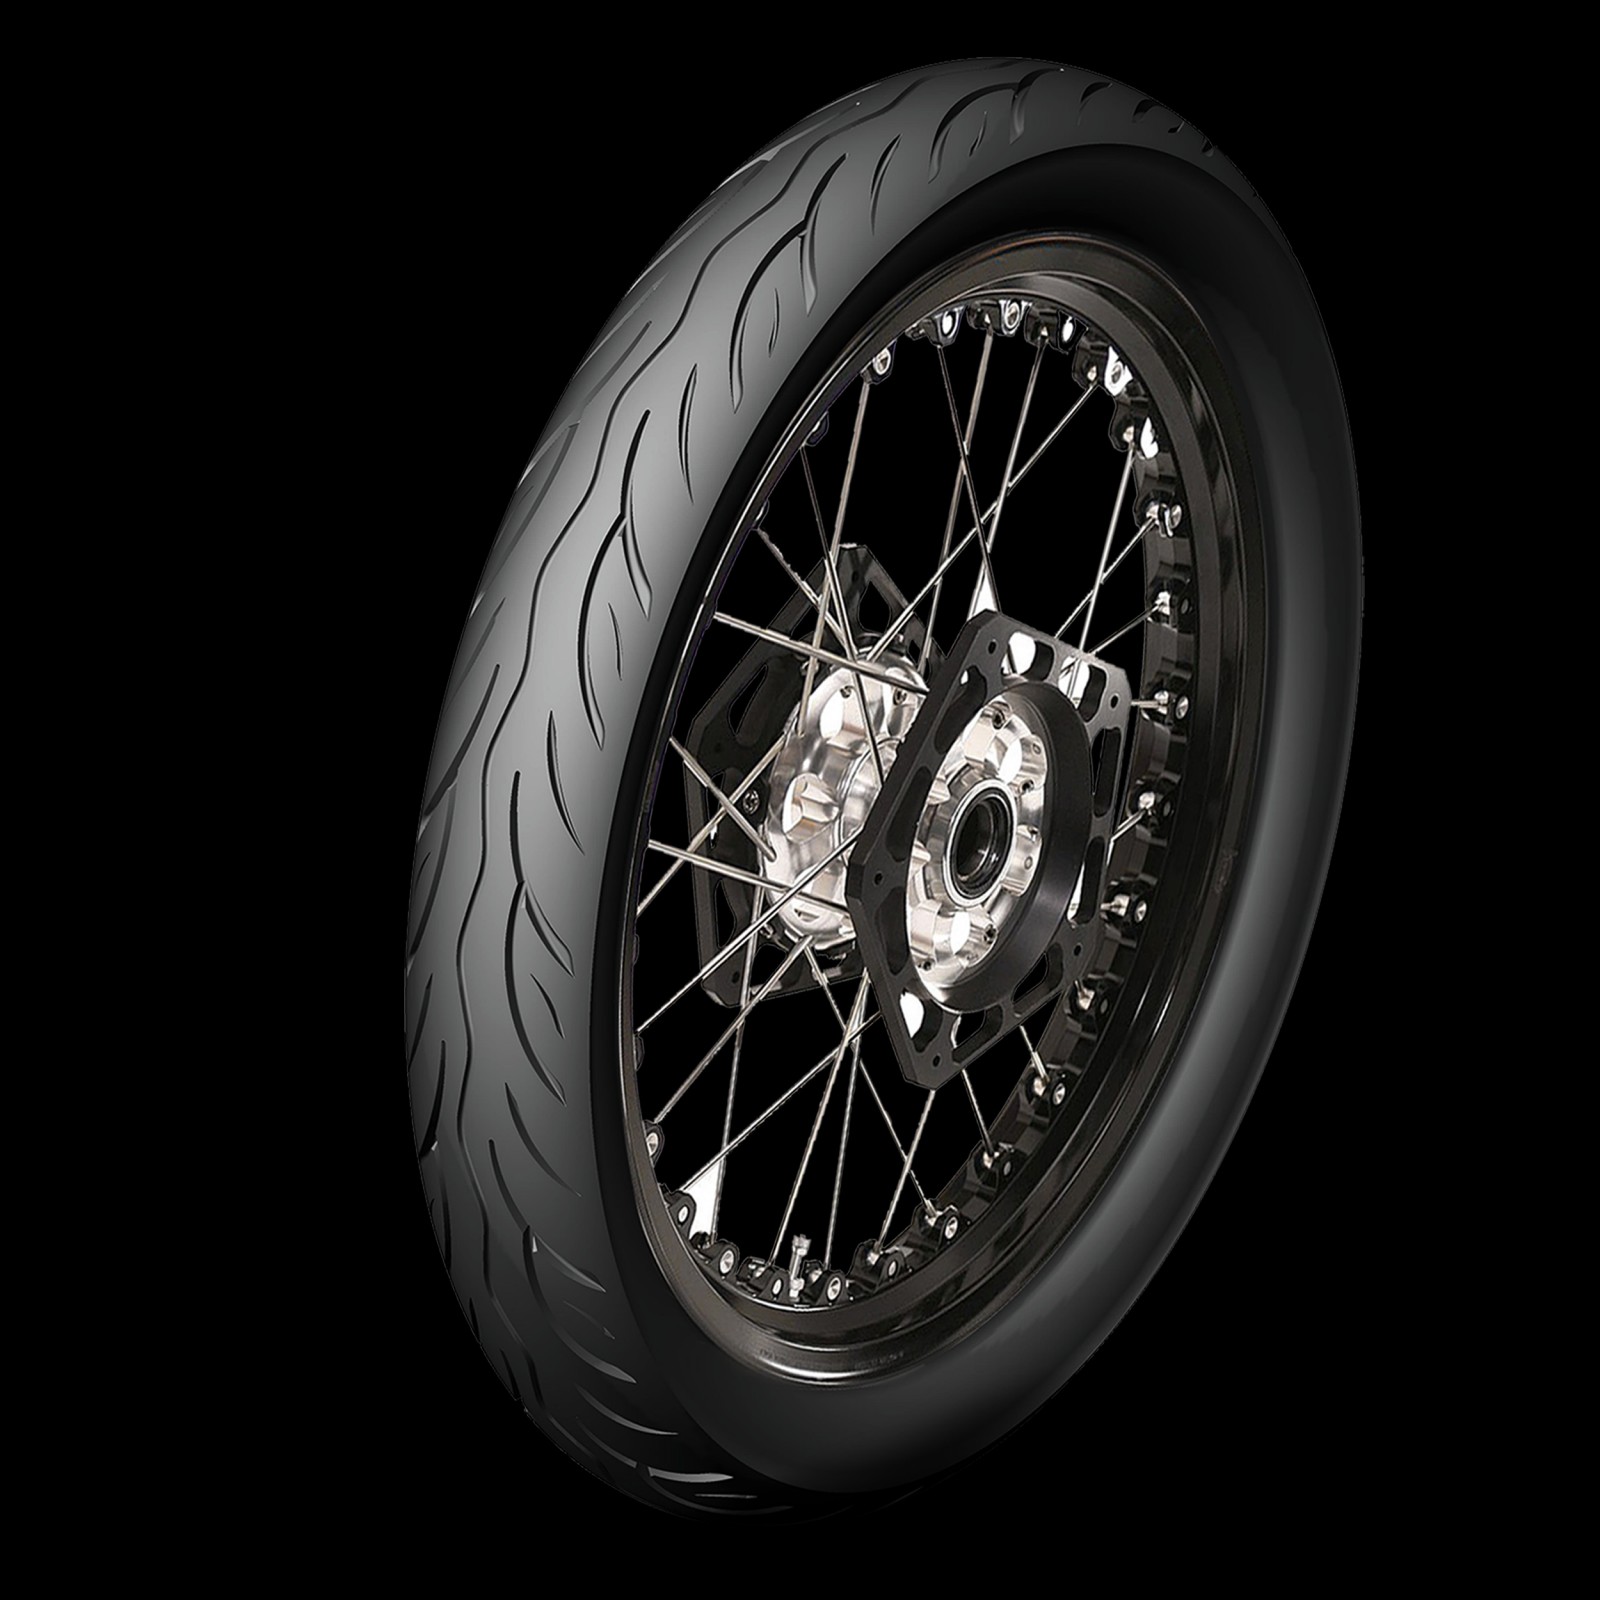 CST caps off 2020 with a new highway-terrain  moto street tire